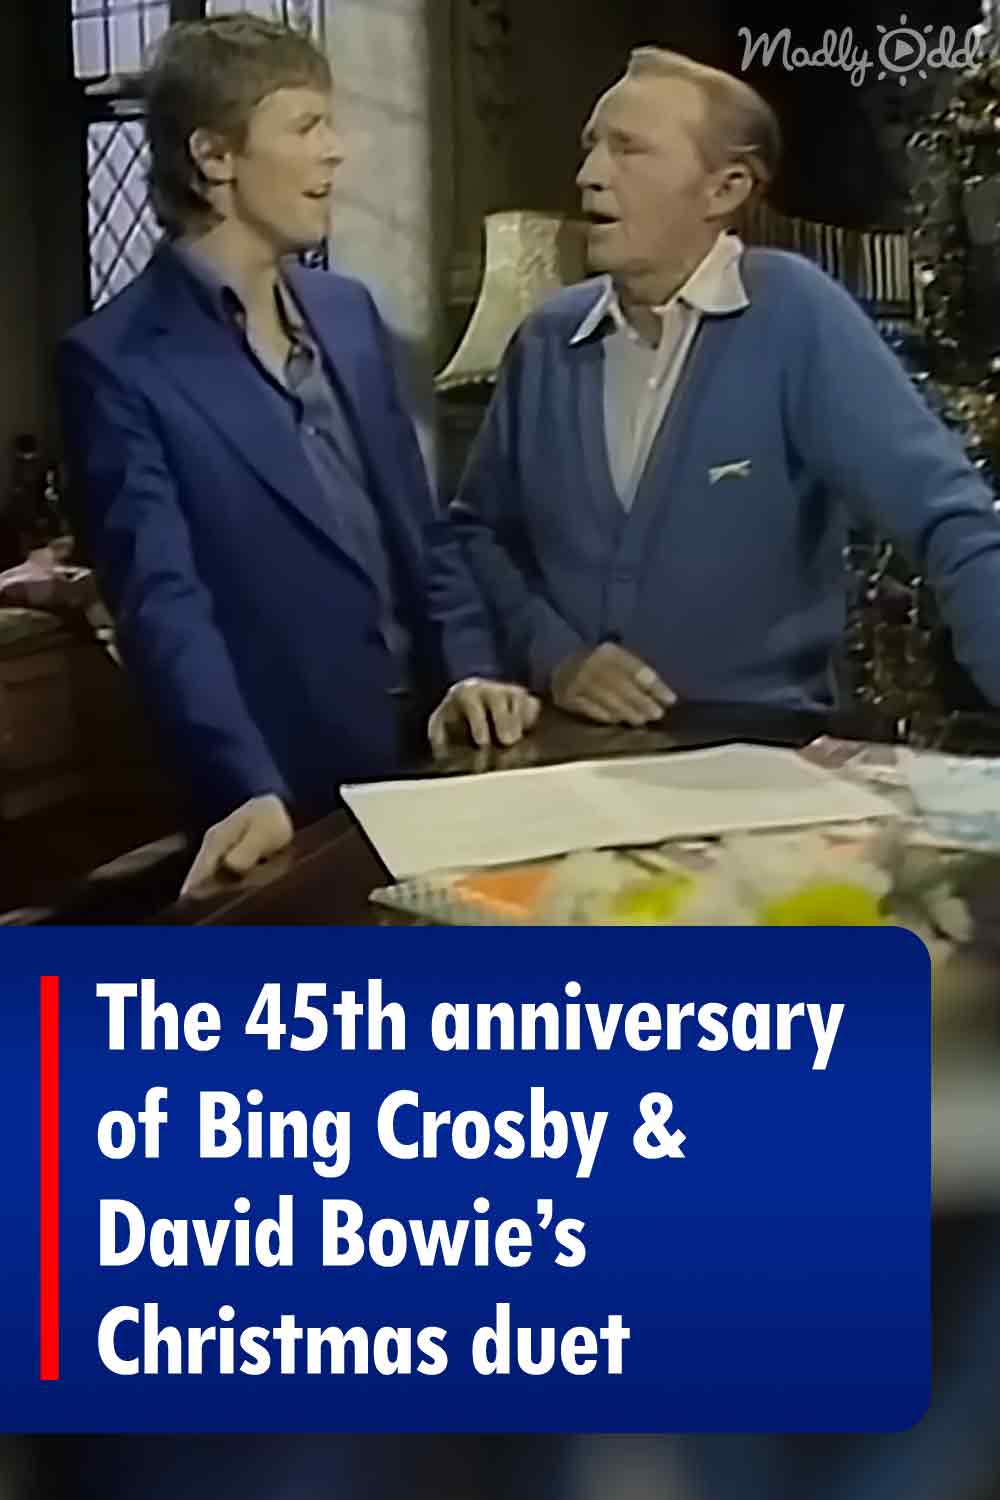 The 45th anniversary of Bing Crosby & David Bowie’s Christmas duet